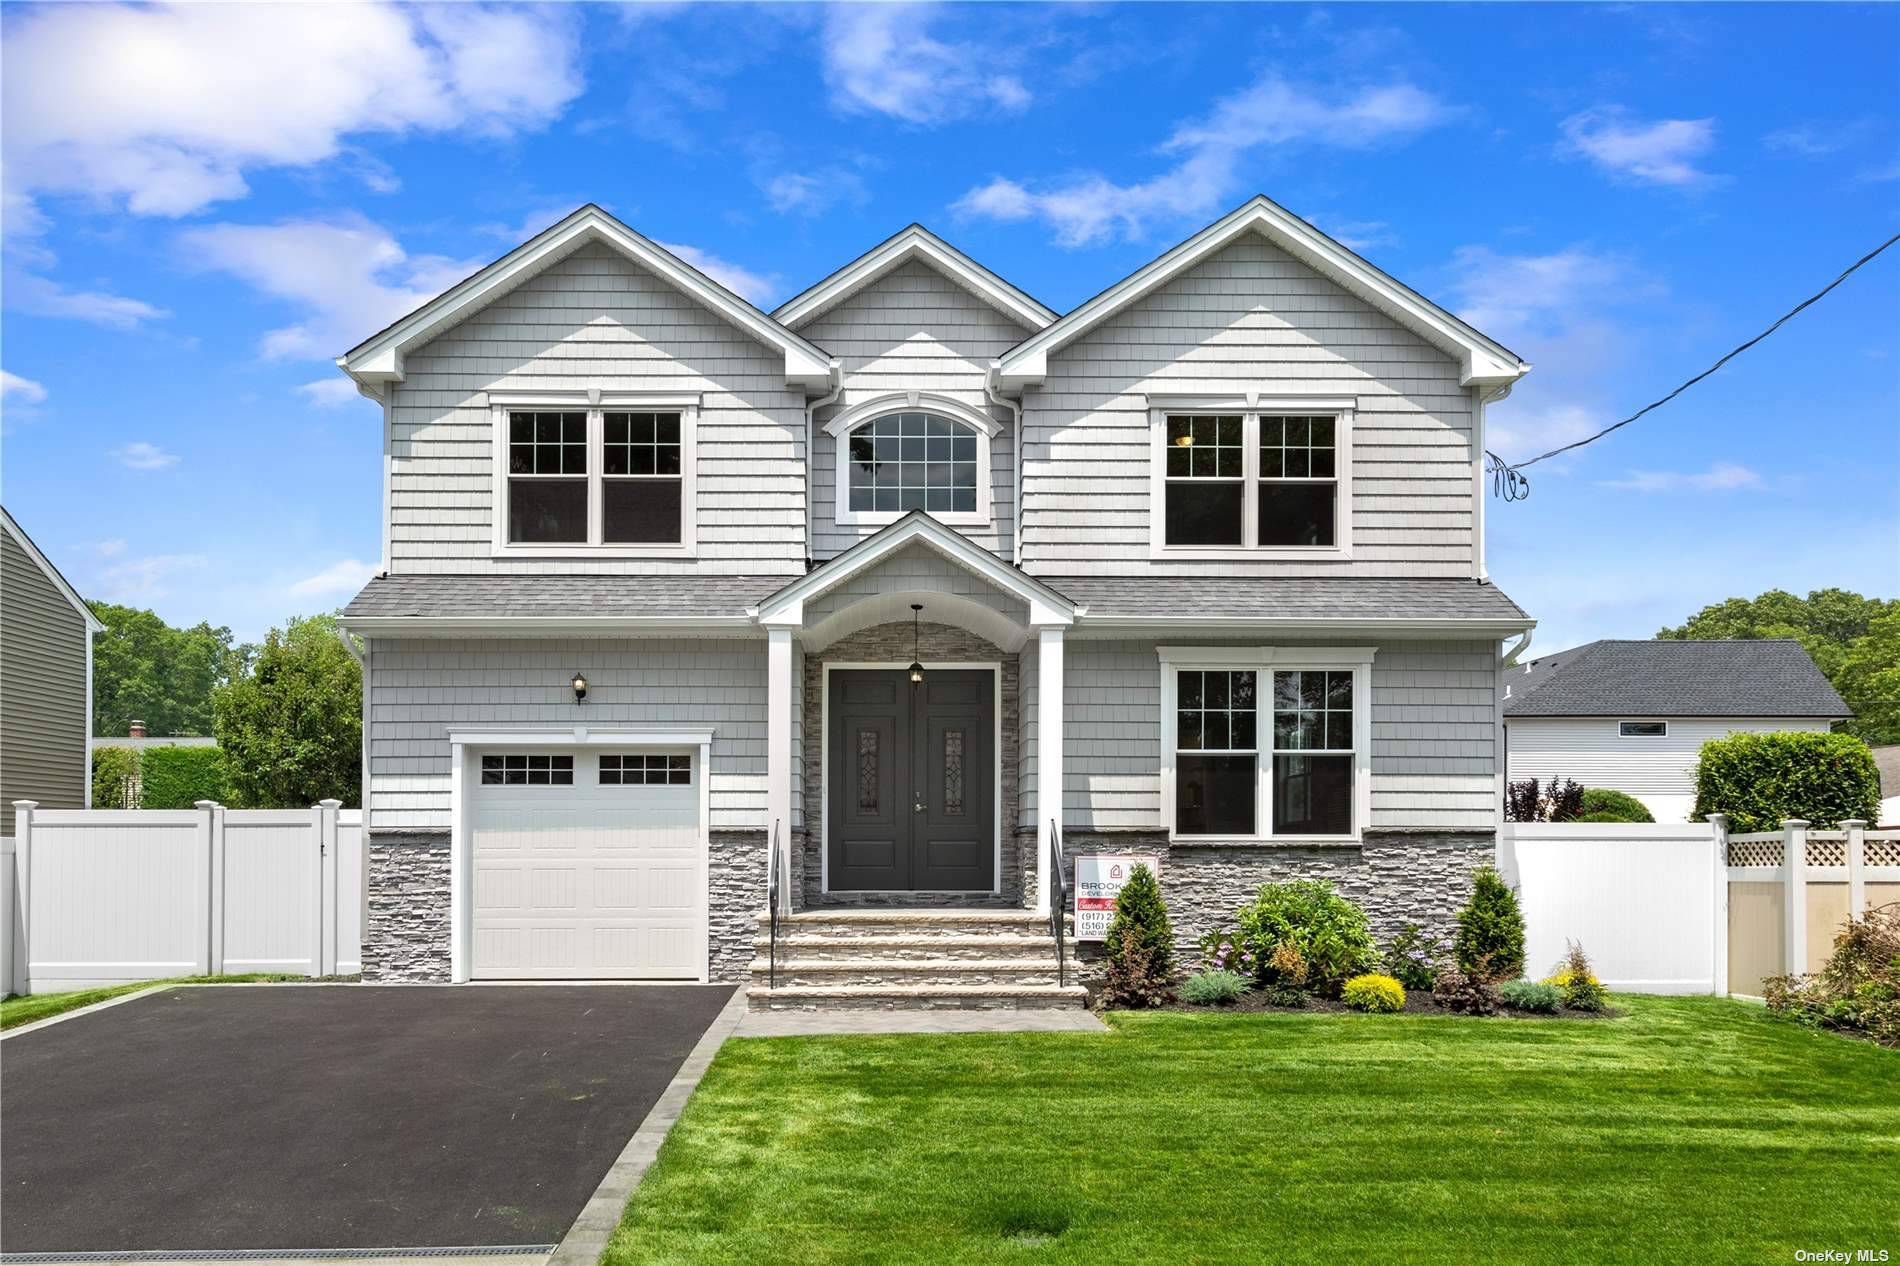 Nestled in the heart of Massapequa this magnificent new build awaits you.